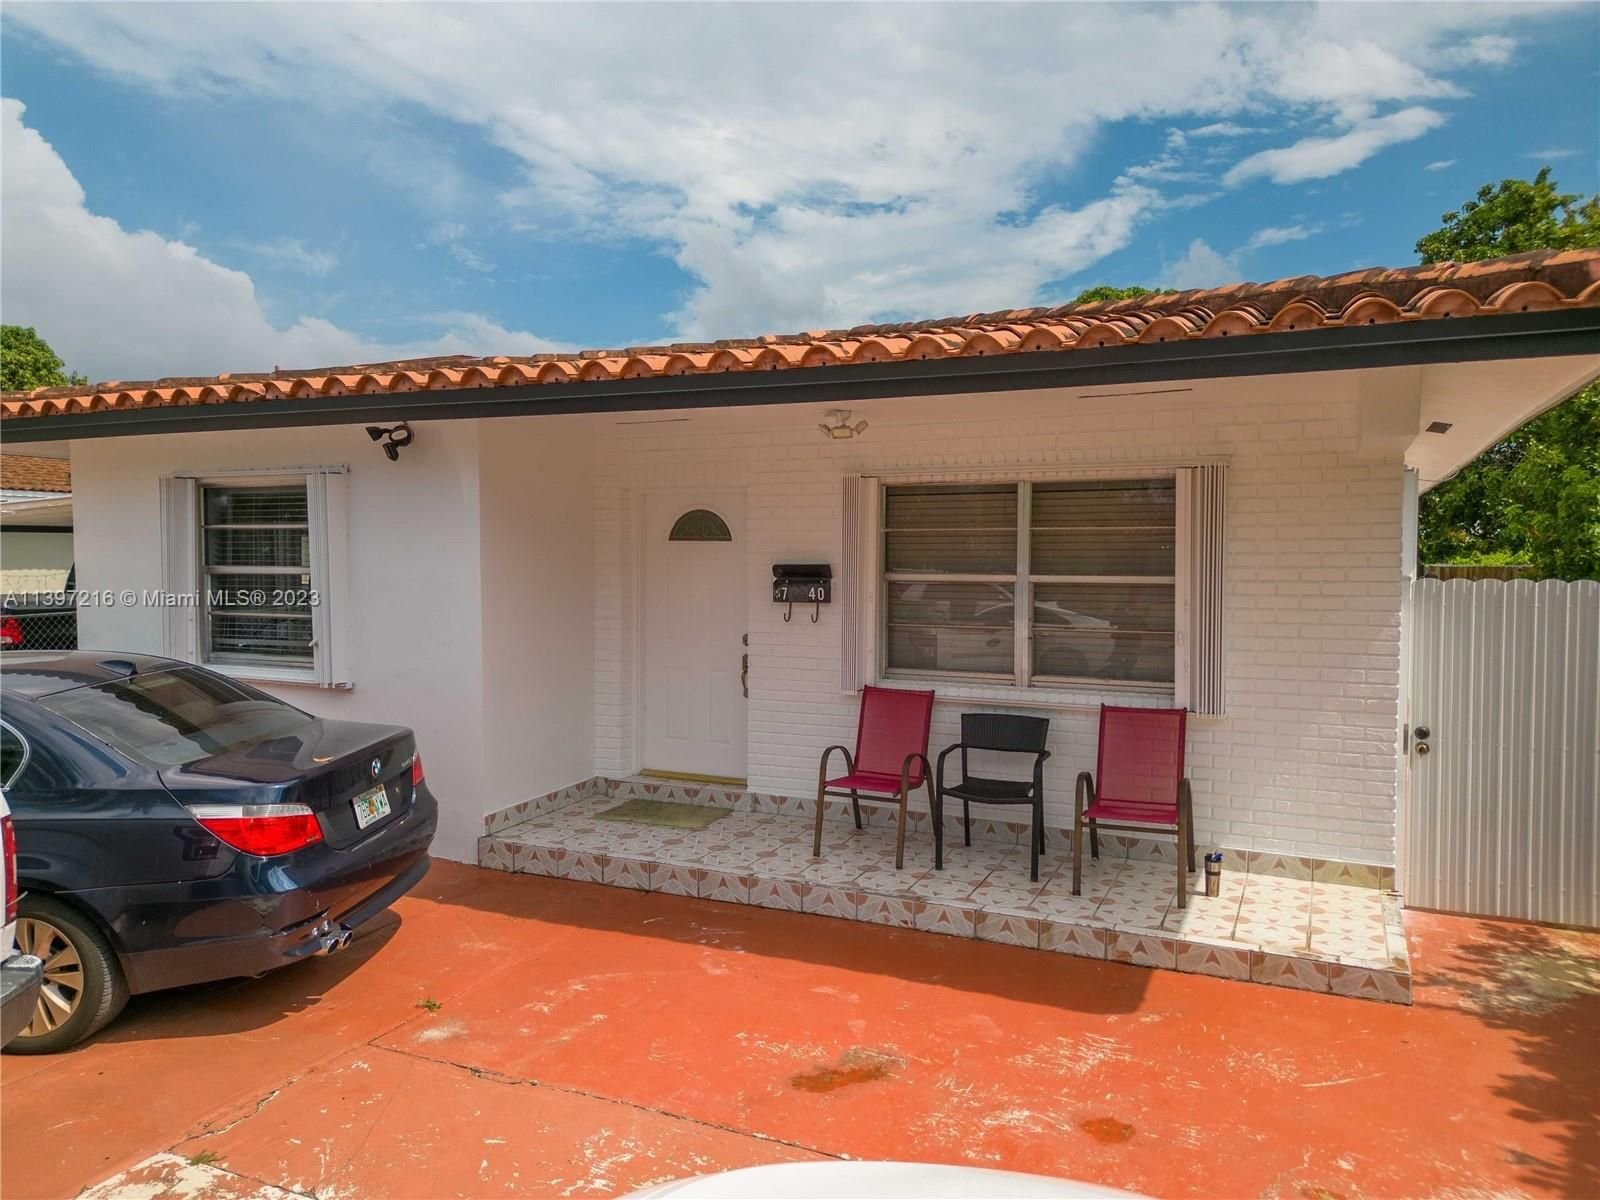 Real estate property located at 740 33rd St, Miami-Dade County, Hialeah, FL